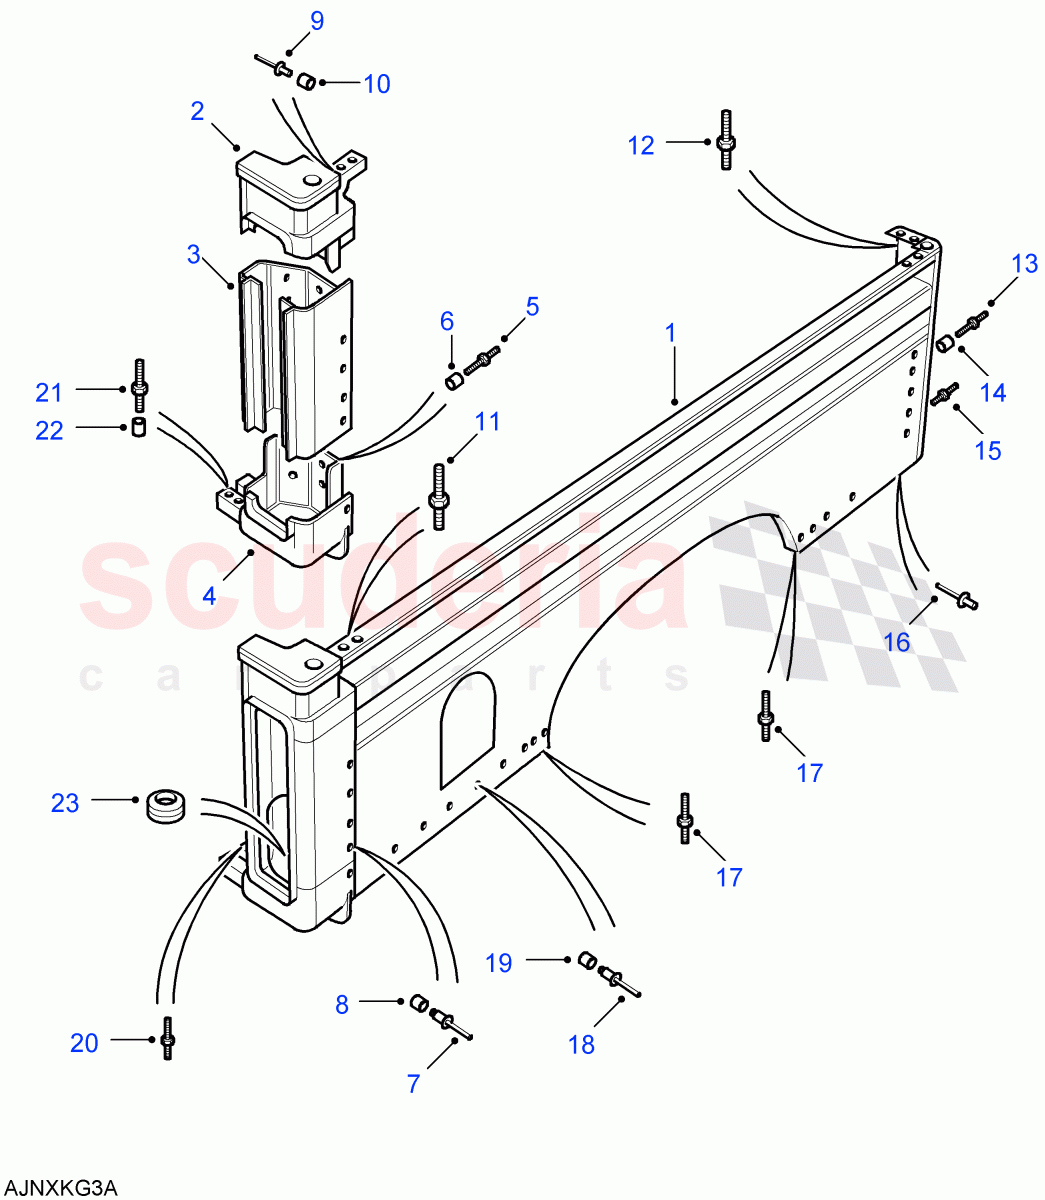 Rear Body Lower - Side Assembly(High Capacity Pick Up,110" Wheelbase,Crew Cab HCPU,130" Wheelbase)((V)FROM7A000001) of Land Rover Land Rover Defender (2007-2016)